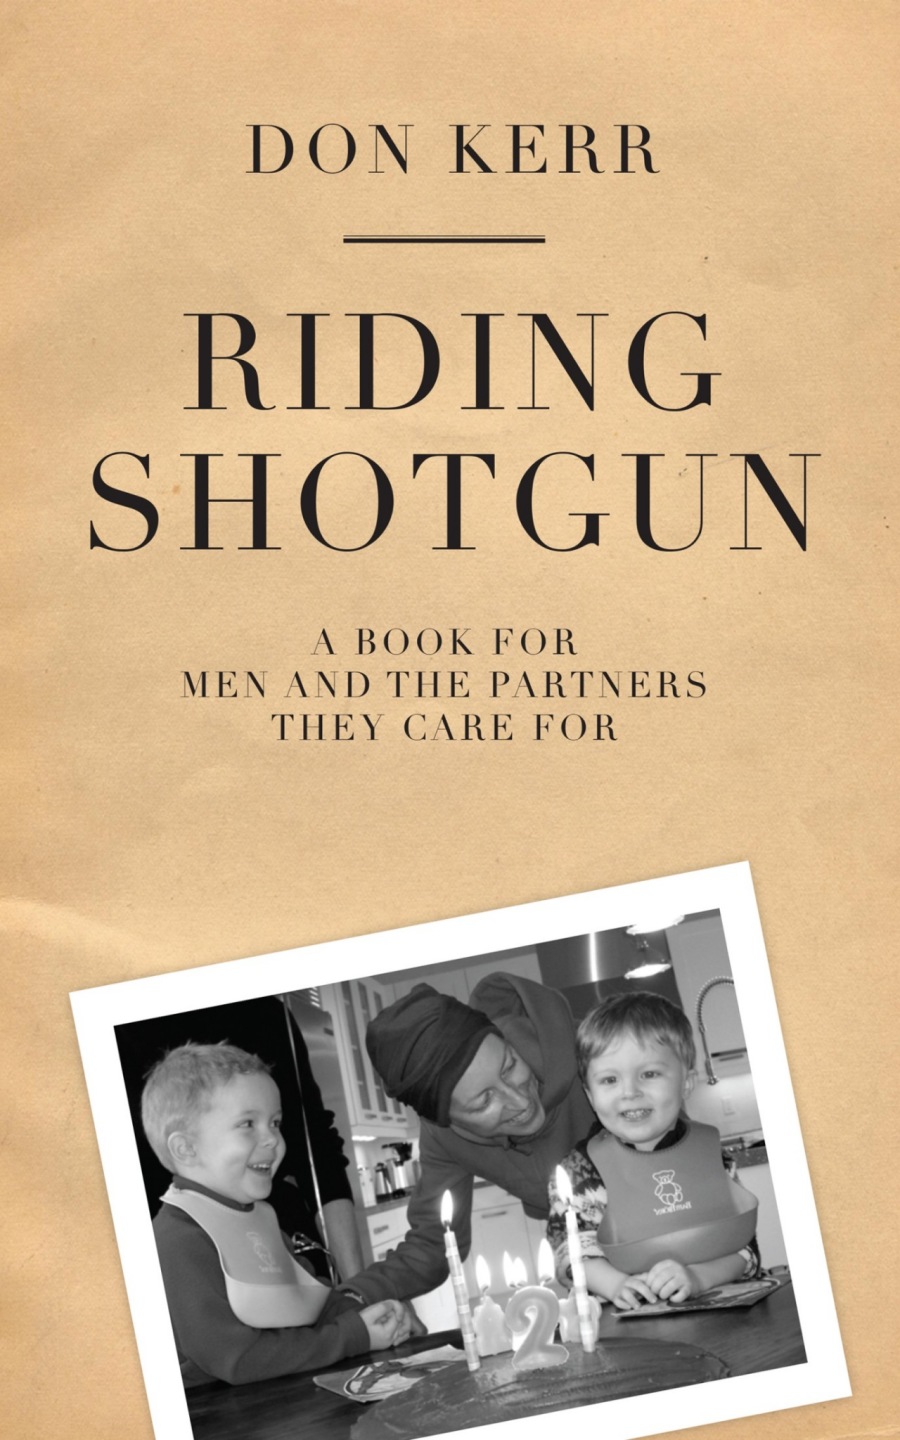 DON KERR

RIDING
SHOTGUN

 

\ BOOK FOR
MEN AND THE PARTNERS
LHENGCA RESEGER